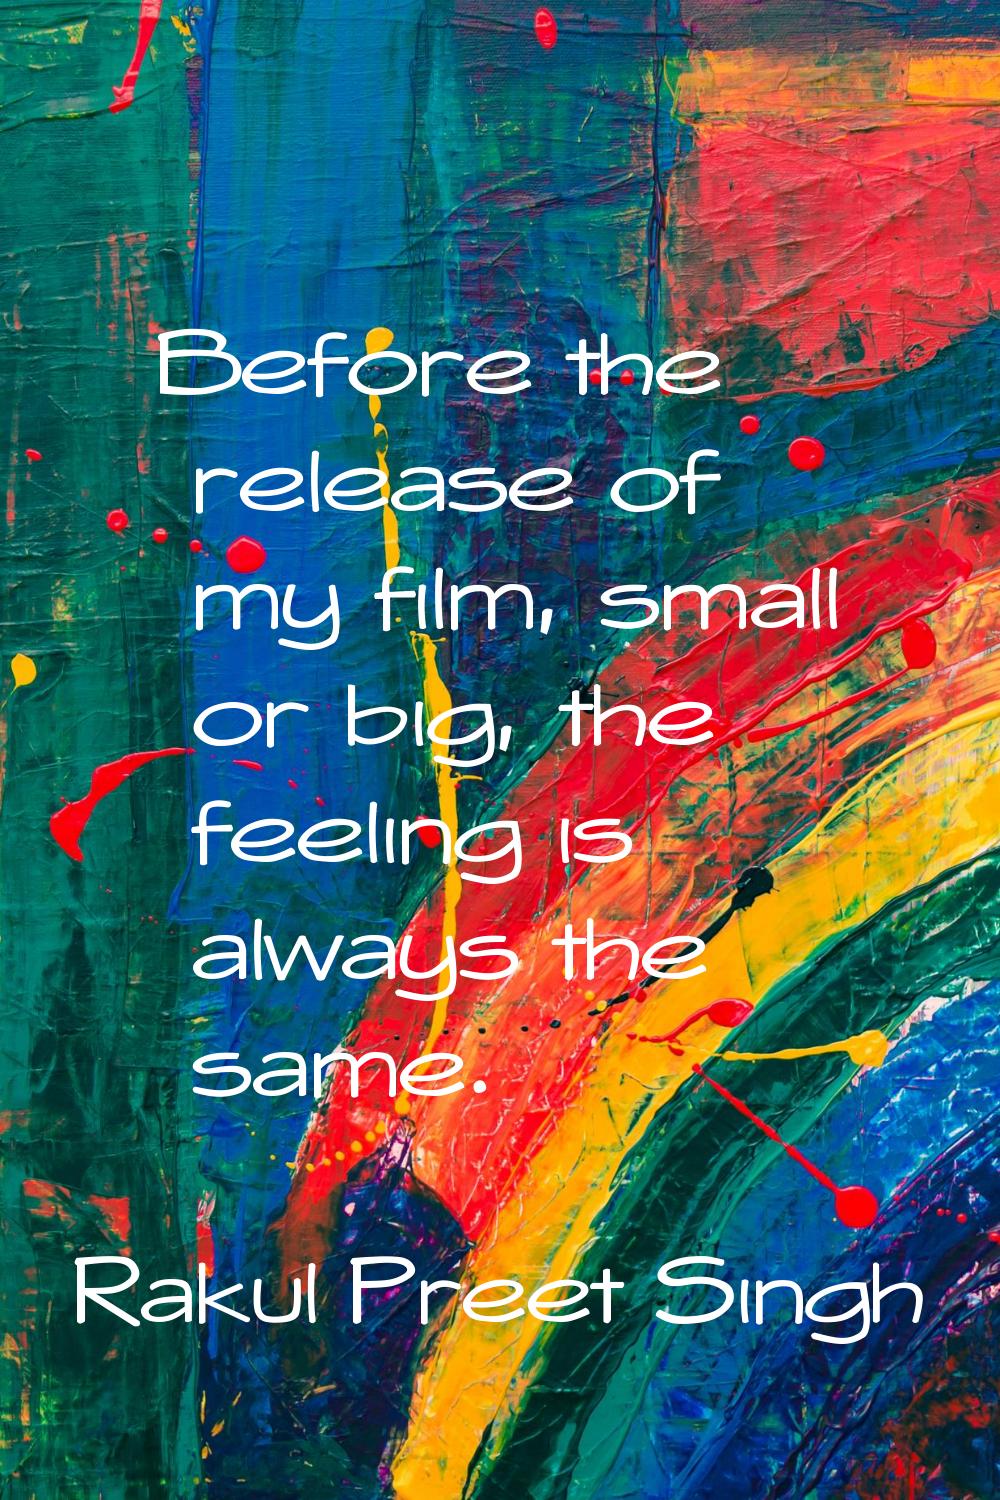 Before the release of my film, small or big, the feeling is always the same.